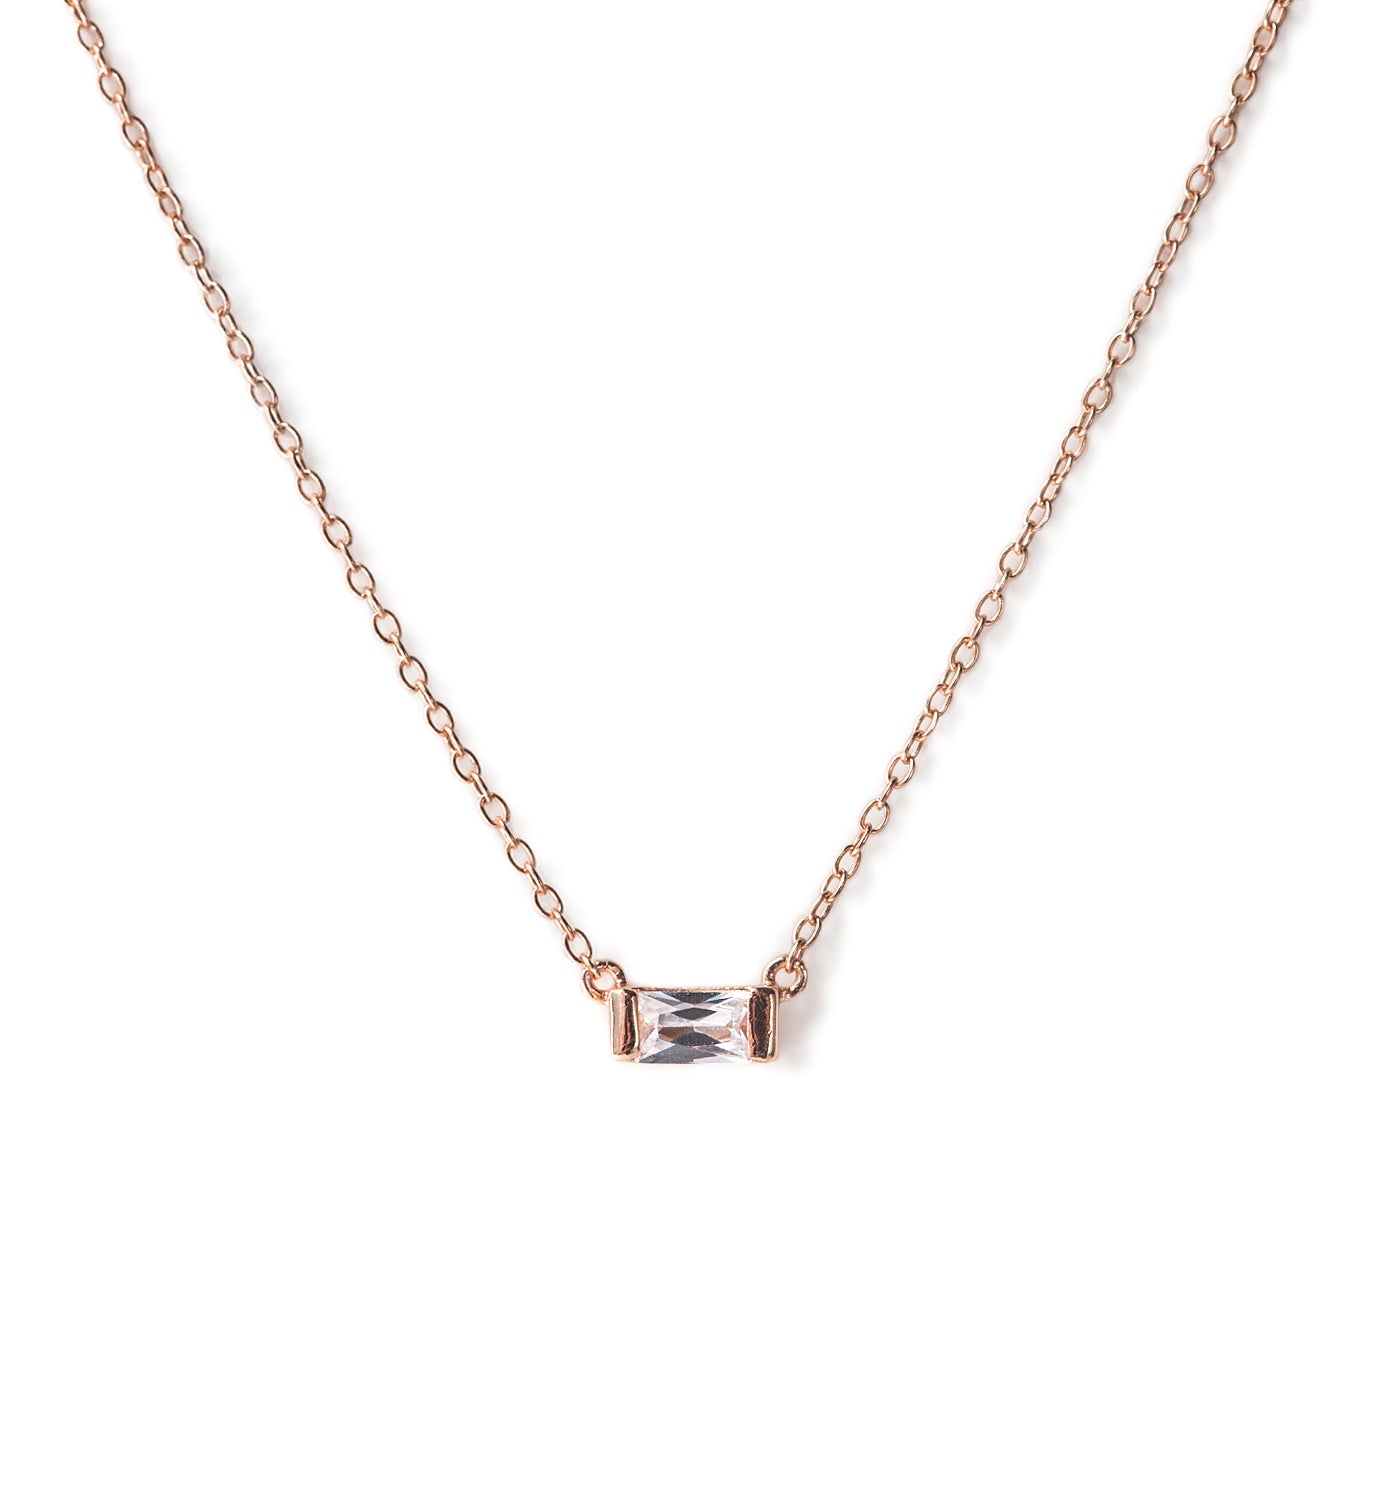 Sofia Baguette Necklace, Necklaces - AMY O. Jewelry